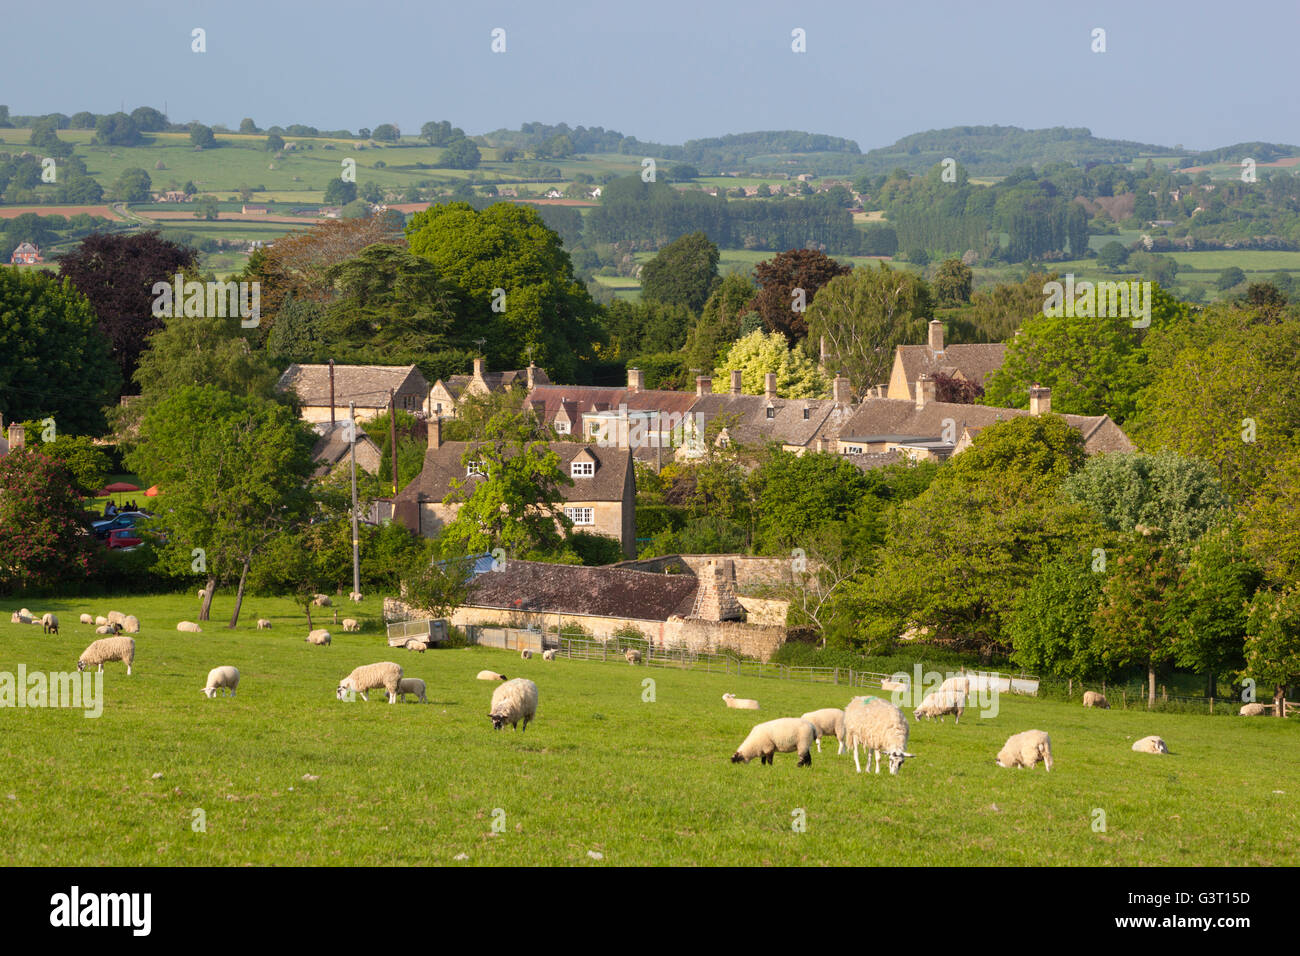 Grazing sheep with view over Cotswold village and landscape, Broad Campden, Cotswolds, Gloucestershire, England, United Kingdom Stock Photo